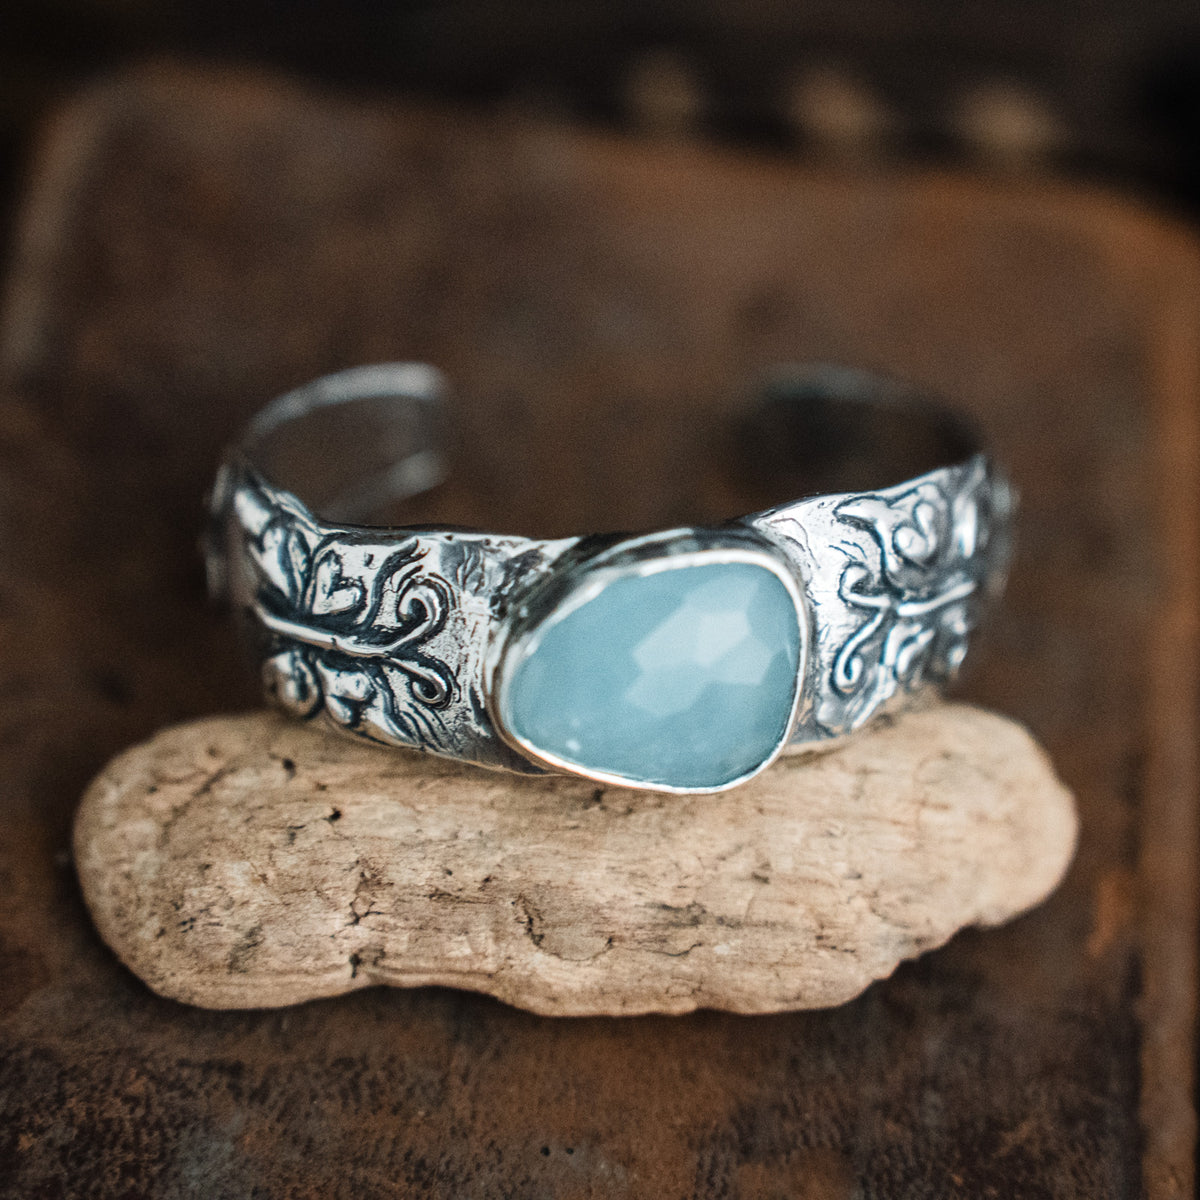 Wings to Fly Aquamarine Cuff